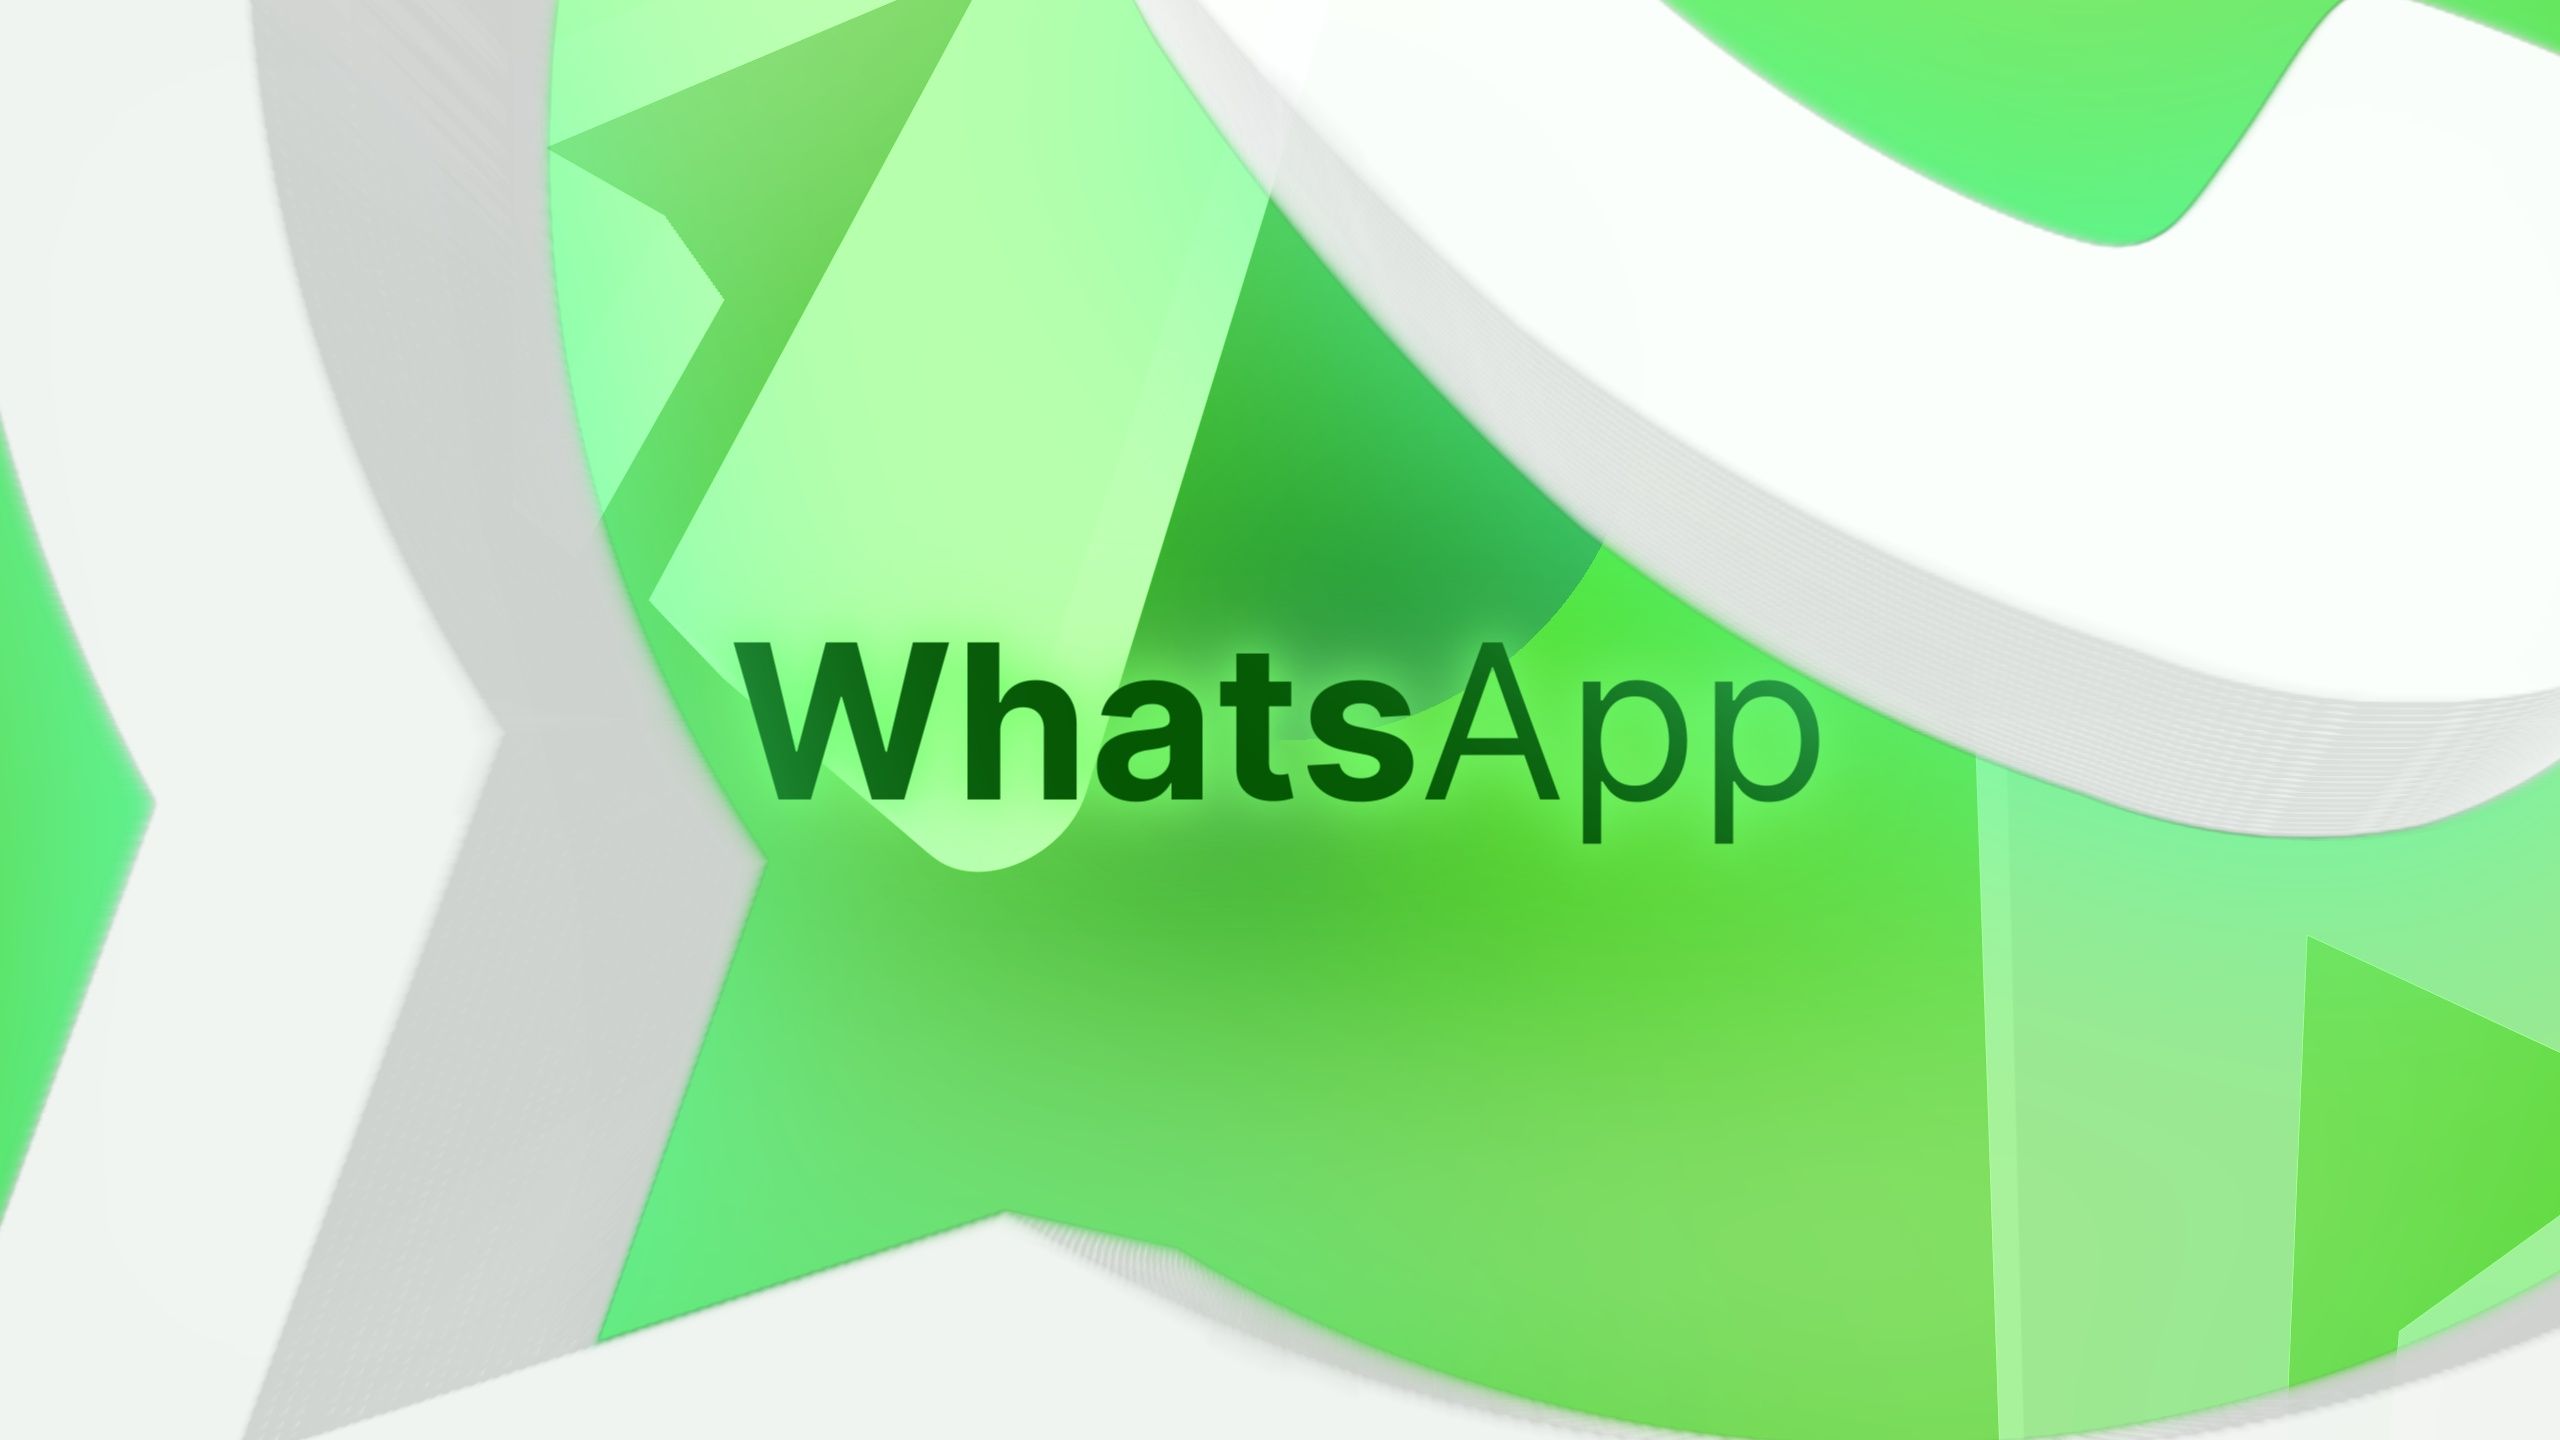 WhatsApp is getting new image generation tools from Meta AI